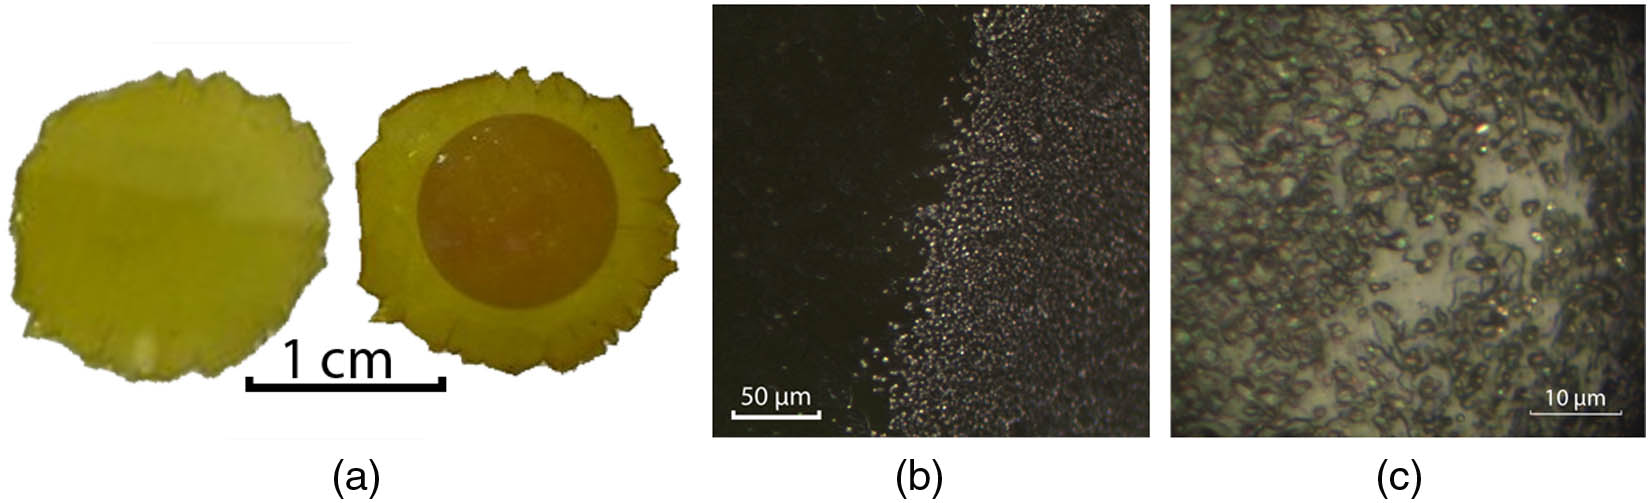 Pictures of Ag0.95Tl0.05Br0.95I0.05: (a) before and after exposure to the UV lamp, (b) 500-fold magnified border between exposed and unexposed parts, and (c) 1000-fold magnification of the exposed area.